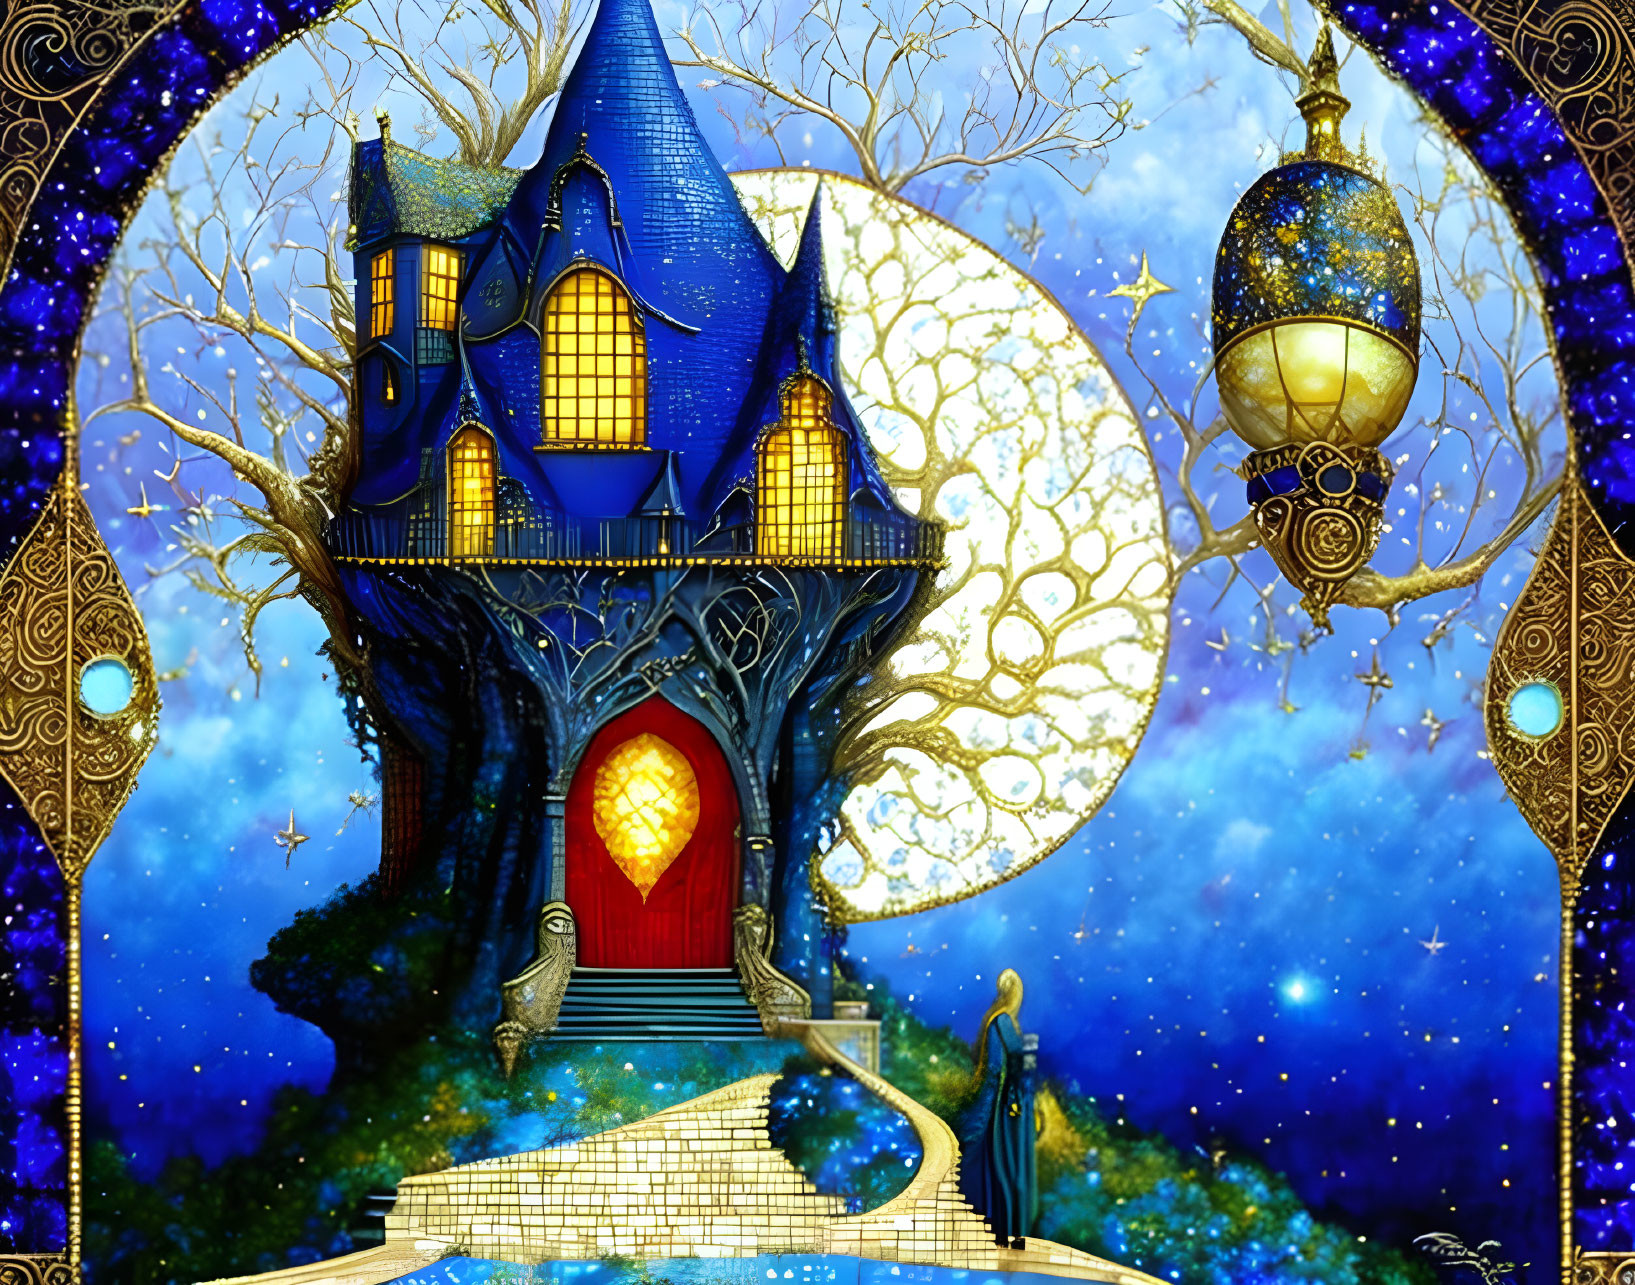 Vibrant blue fantasy house on tree with person and lantern under full moon